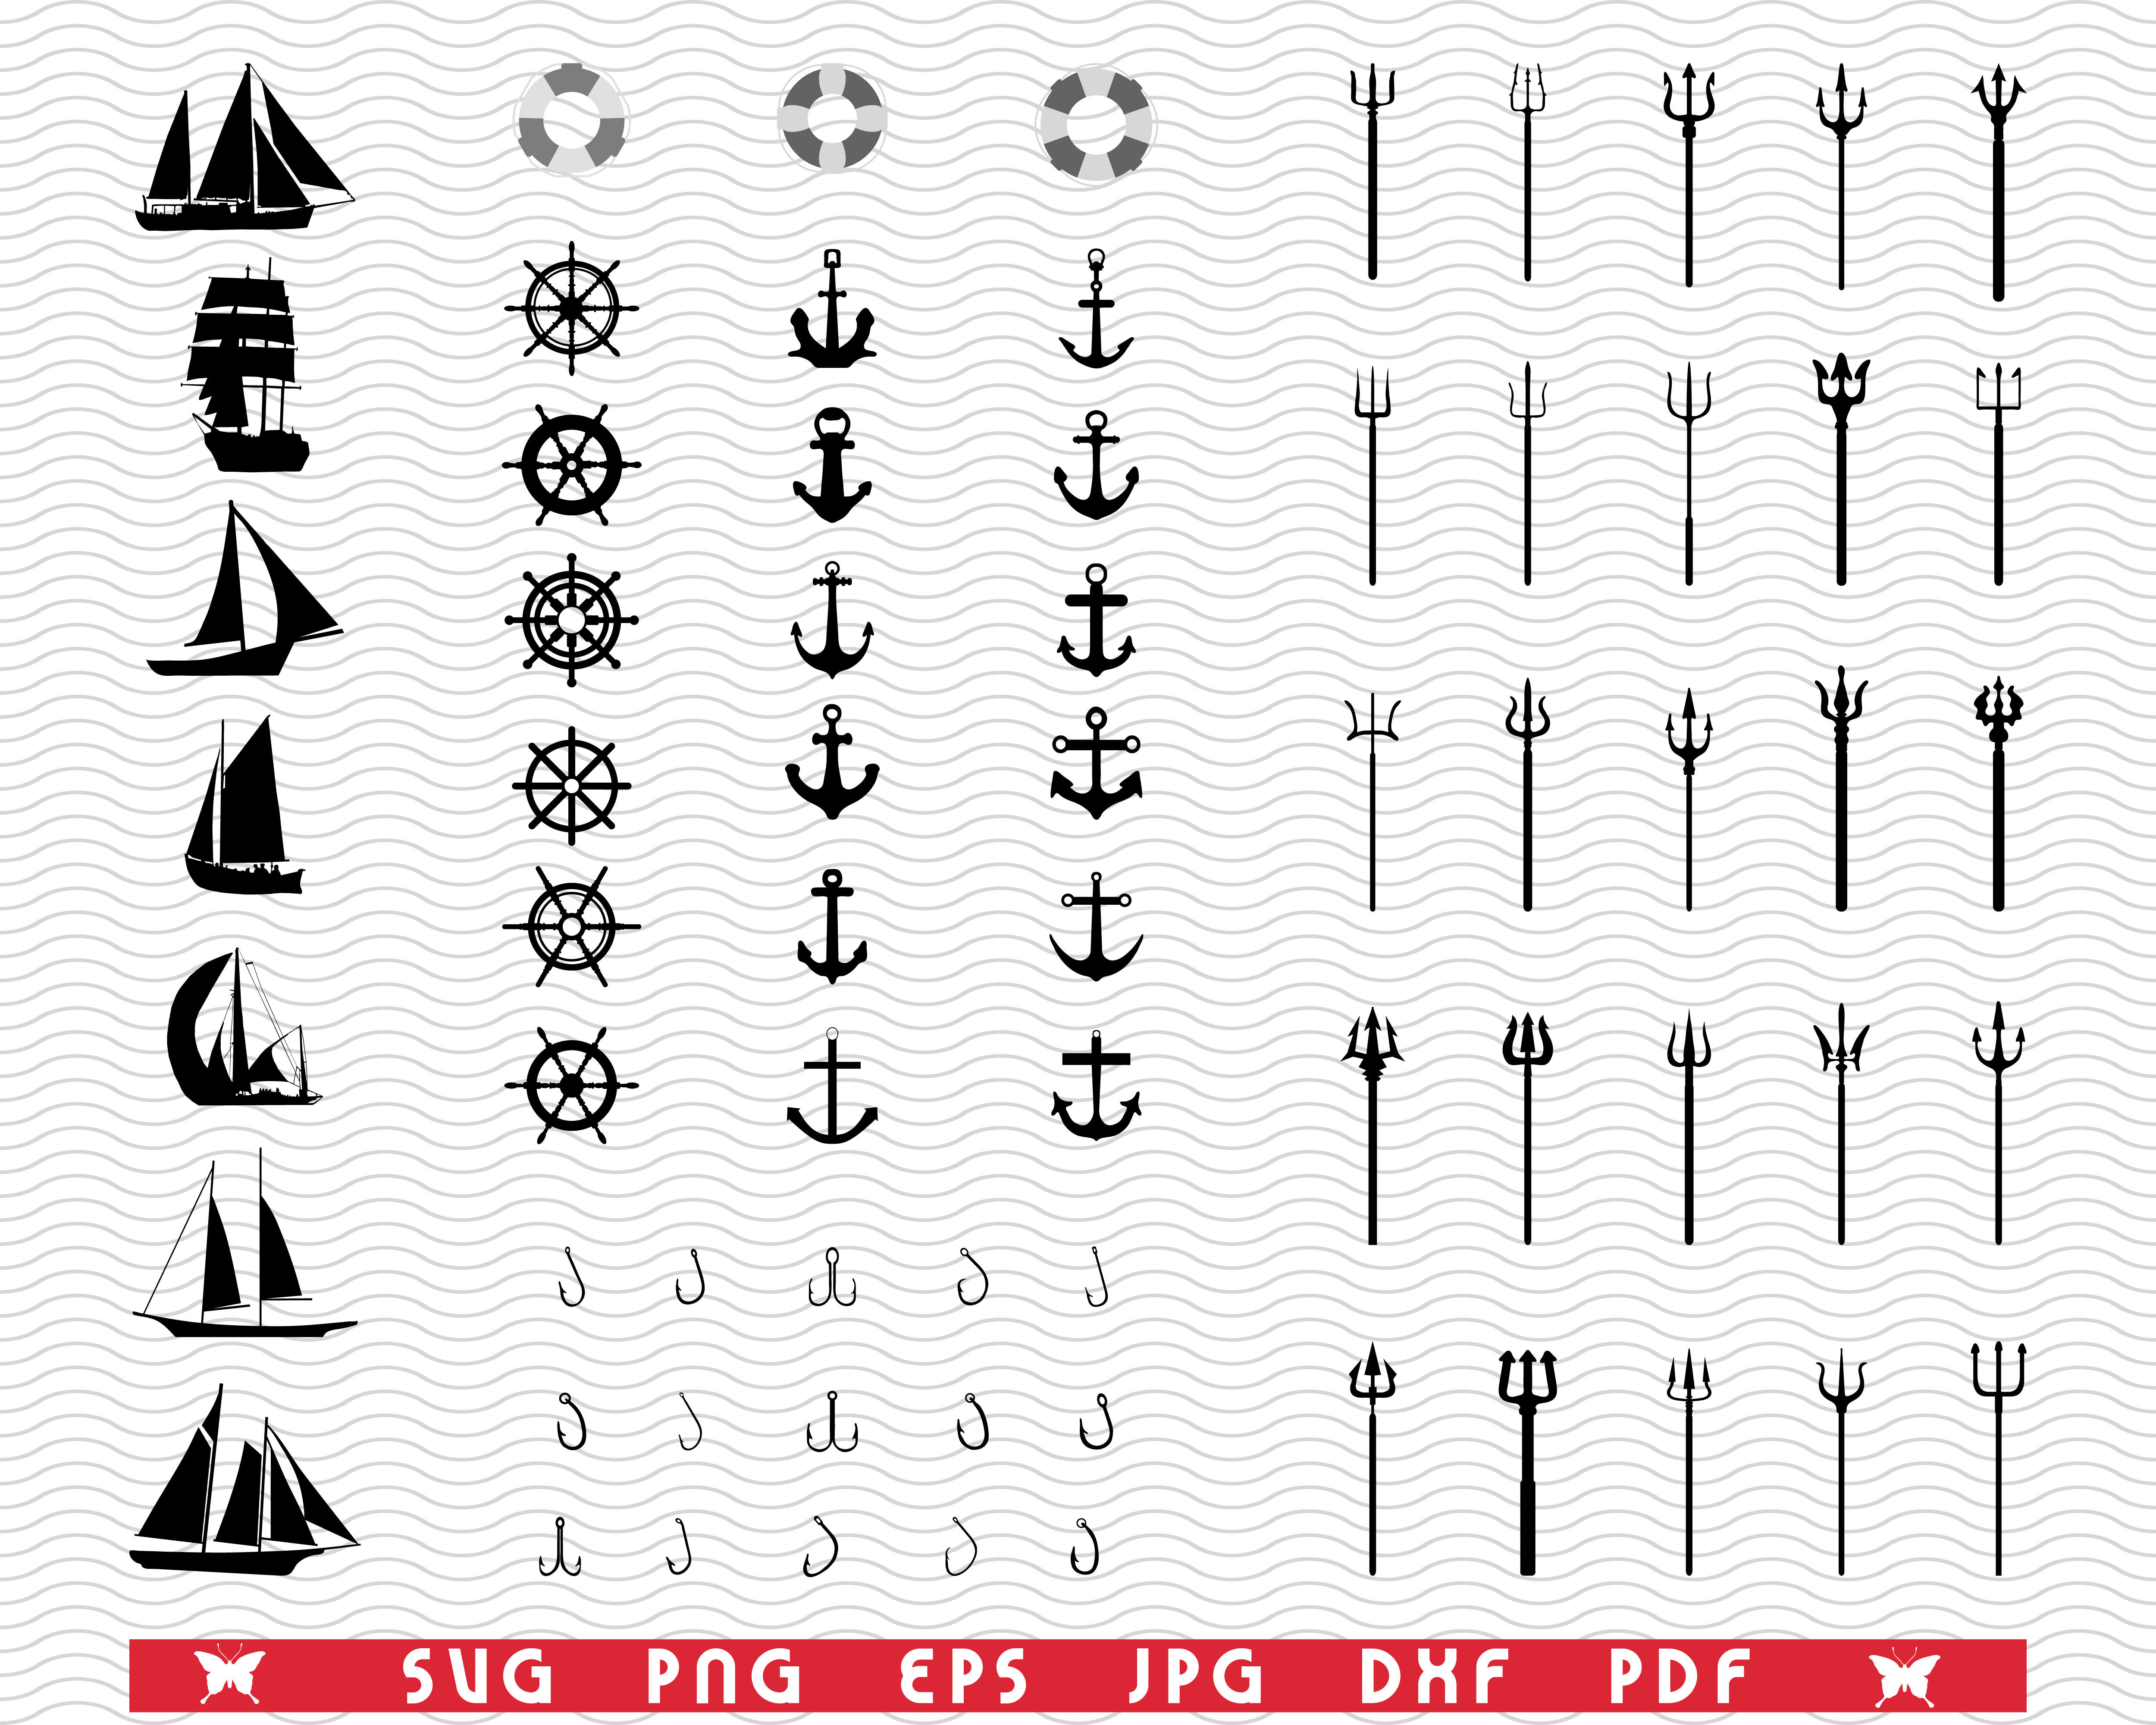 Download Svg Icons Of Nautical Black Silhouettes Digital Clipart By Designstudiorm Thehungryjpeg Com